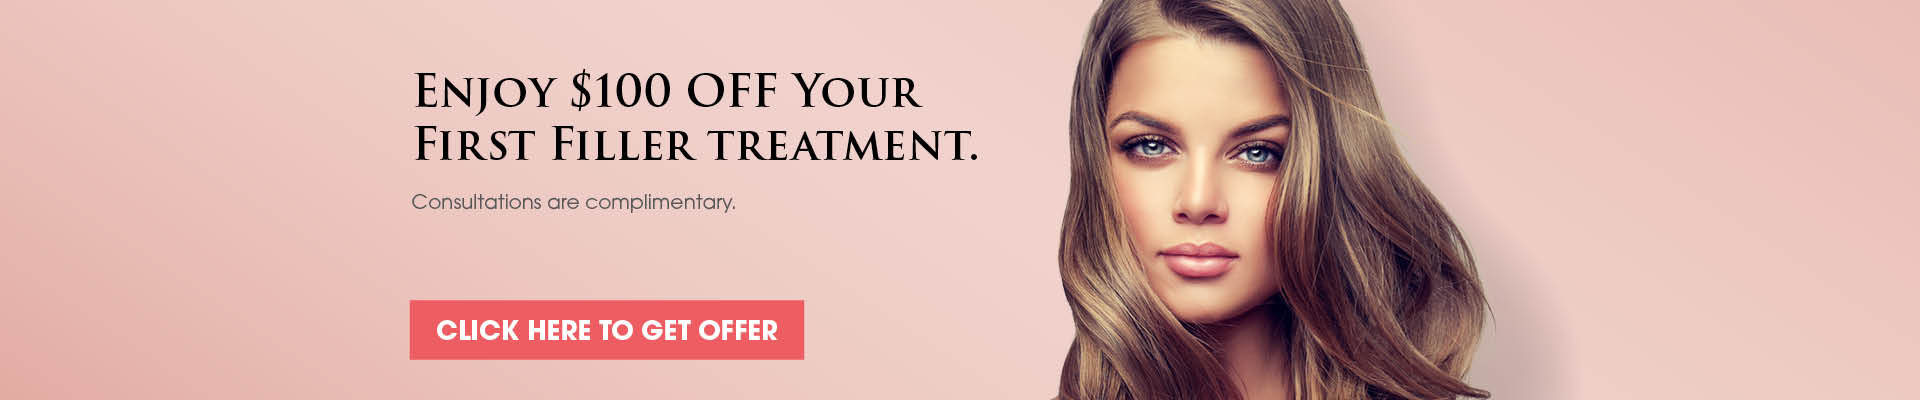 New Patient Offer for Cosmetic Filler